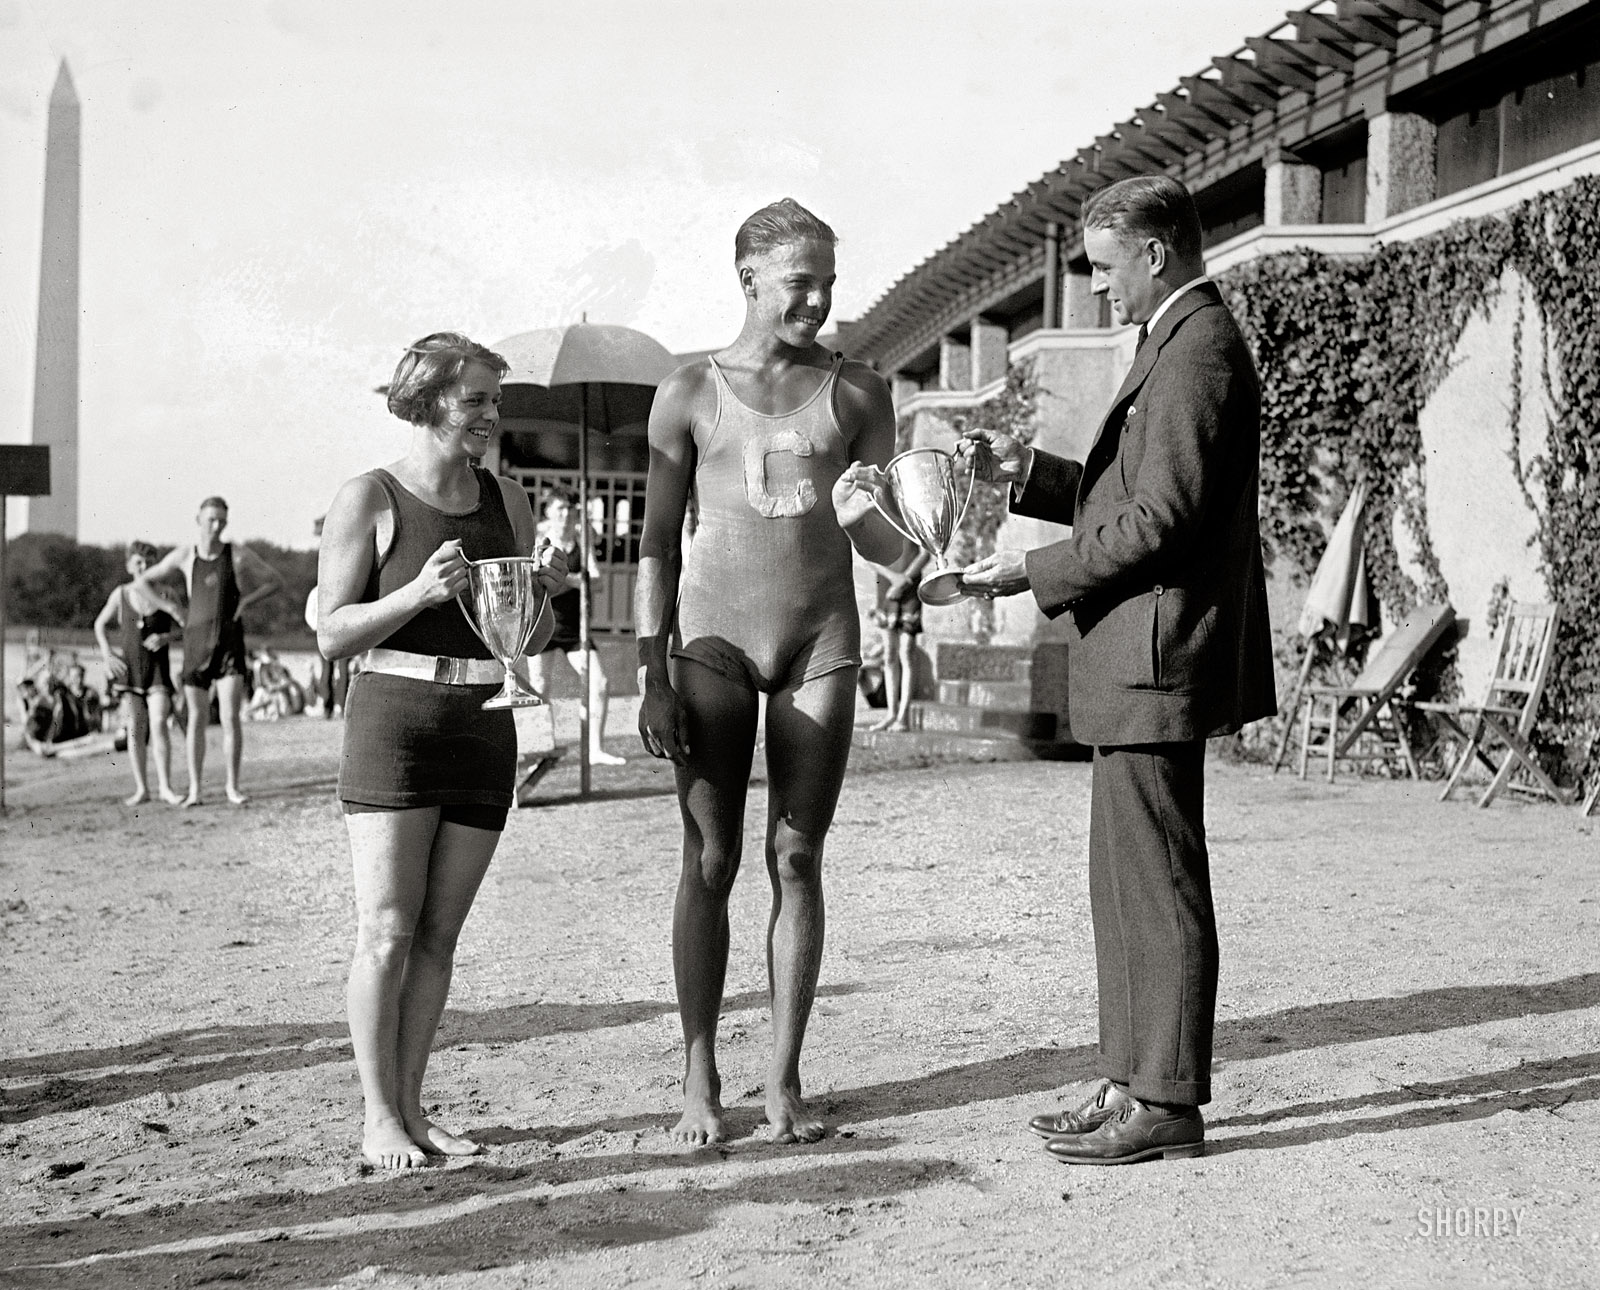 August 15, 1922. Washington, D.C. "Florence Skadding and Mark Coles." At the Tidal Basin bathing pavilion. National Photo glass negative. View full size.